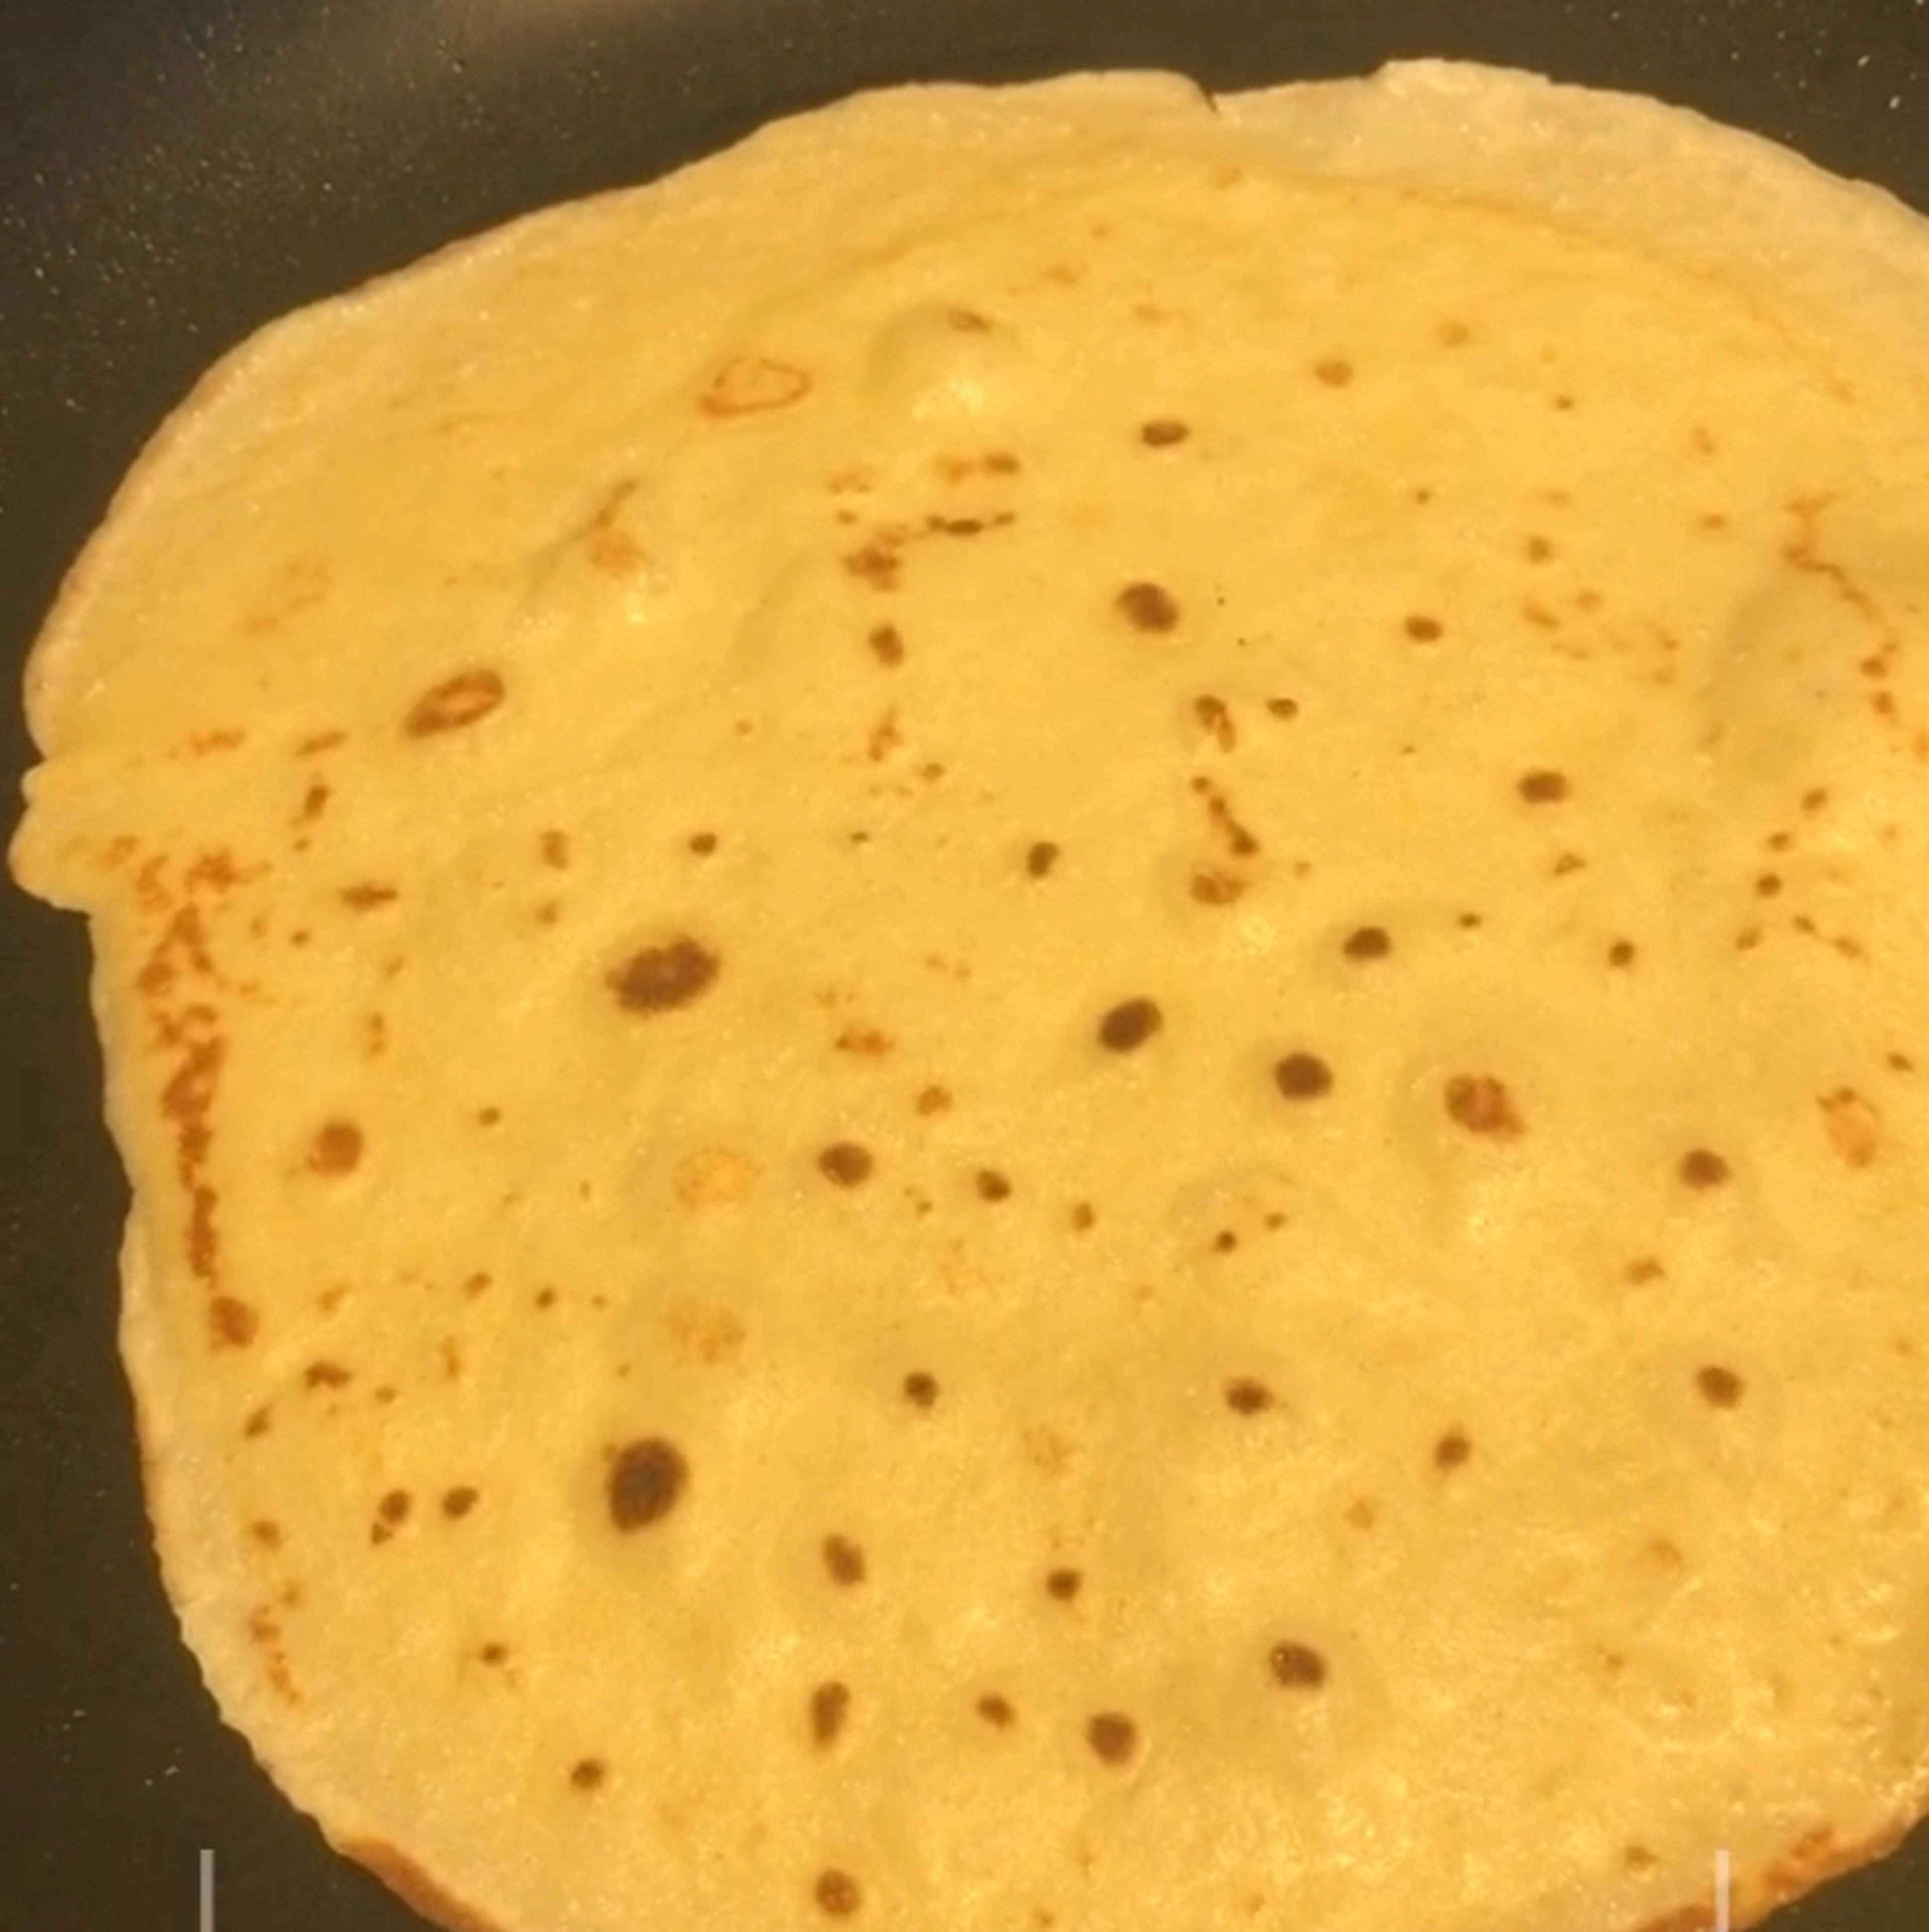 Cook the pancake for about 1-2 minutes, until the bottom is light brown. Loosen with a spatula, turn and cook the other side. Serve hot.